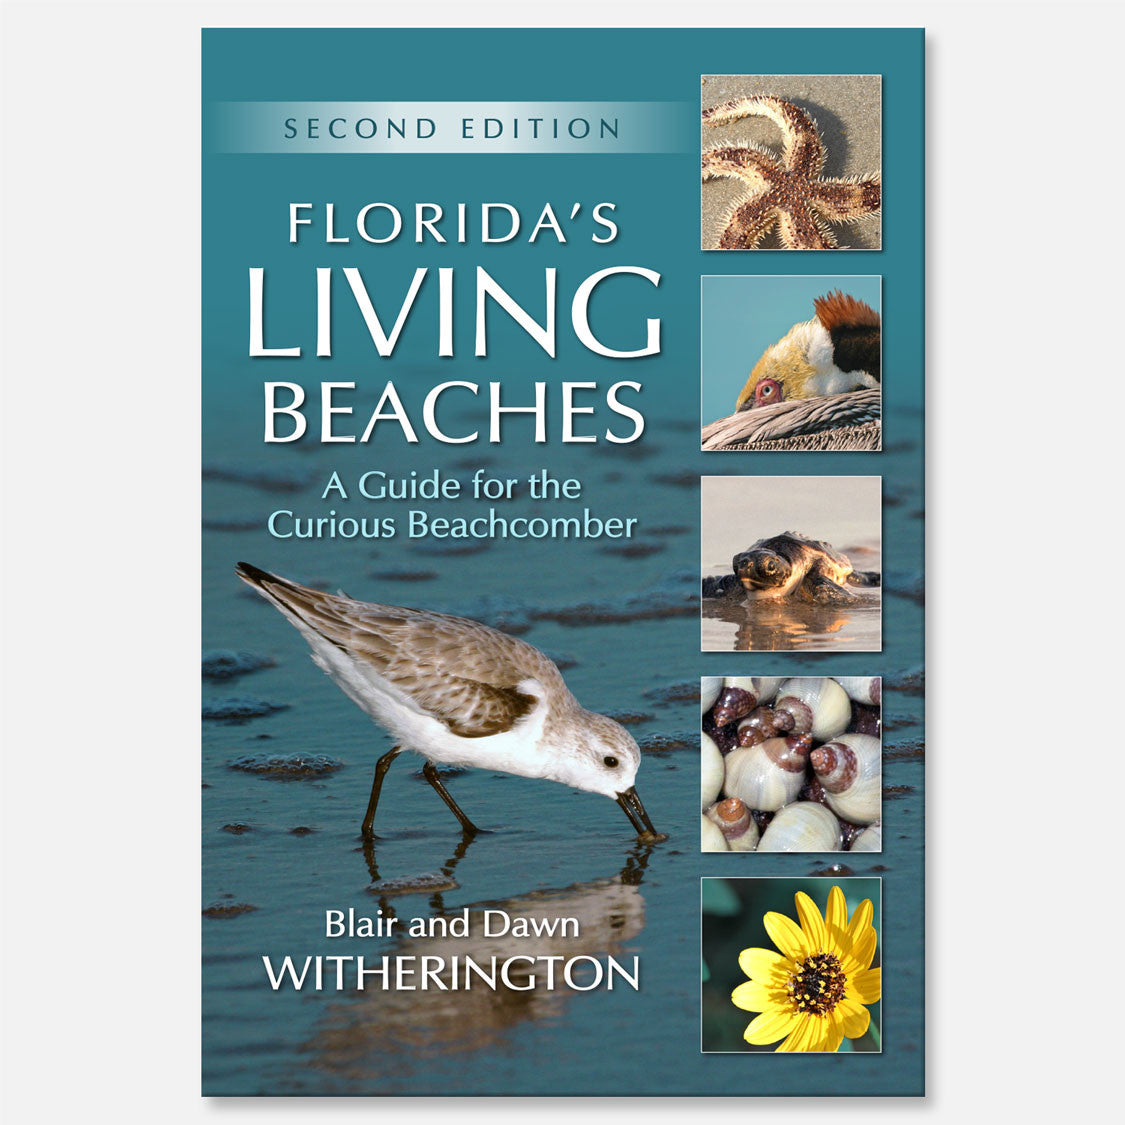 Florida's Living Beaches (2nd Edition) by Blair and Dawn Witherington